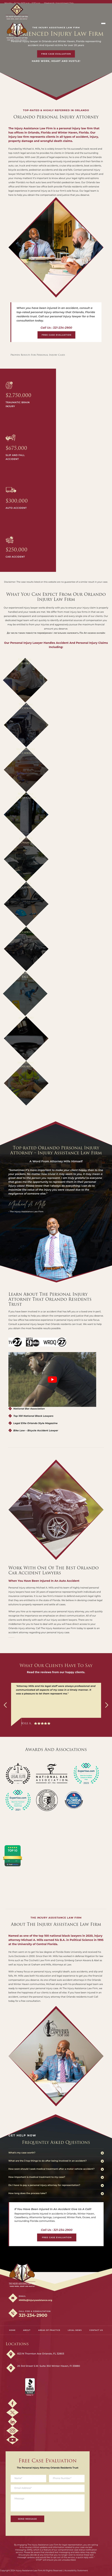 The Injury Assistance Law Firm - Orlando FL Lawyers